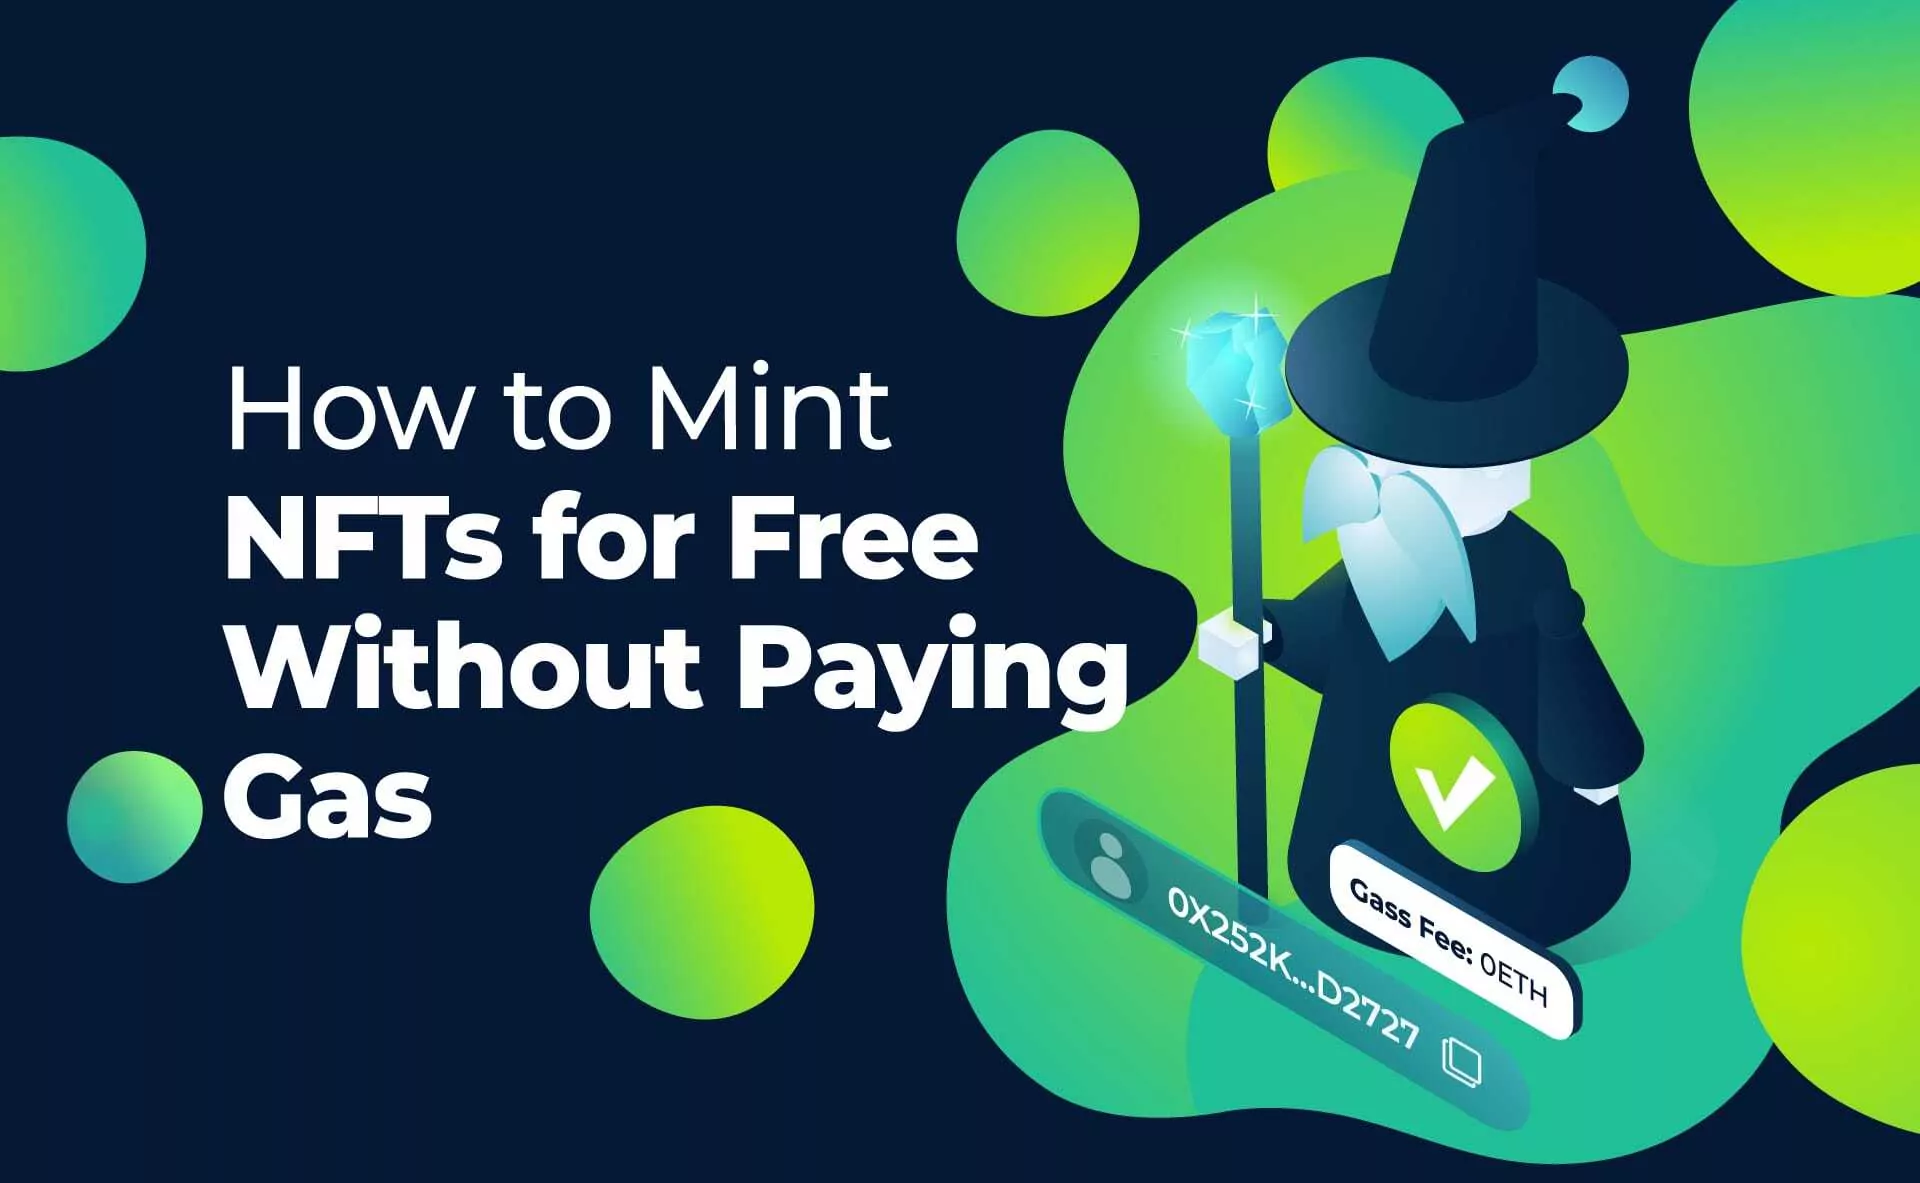 Marketplaces To Mint NFTs For Free